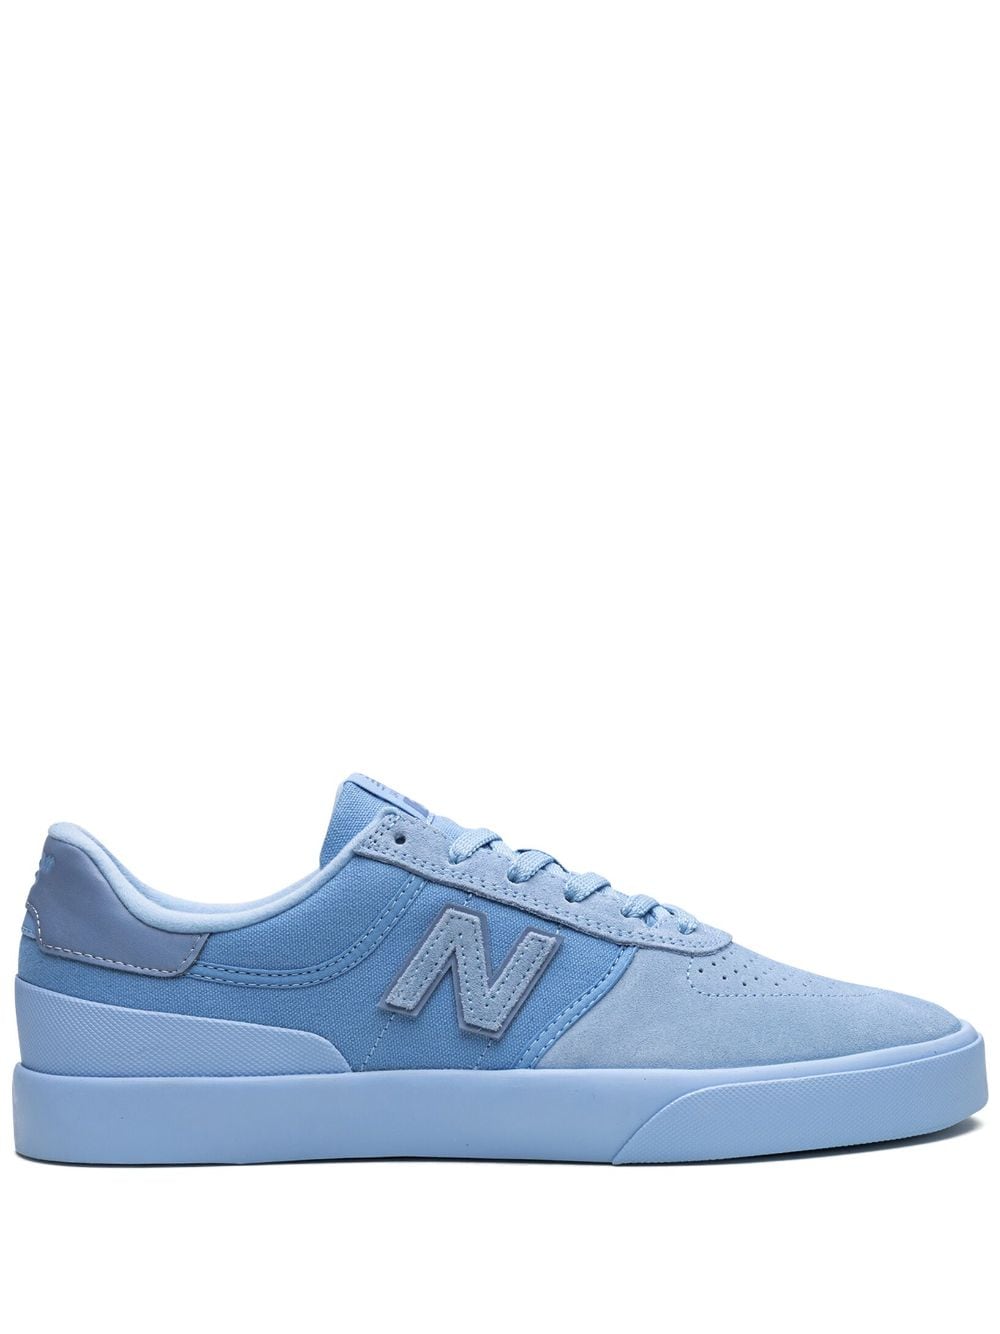 New Balance NB Numeric 272 "Blue" sneakers